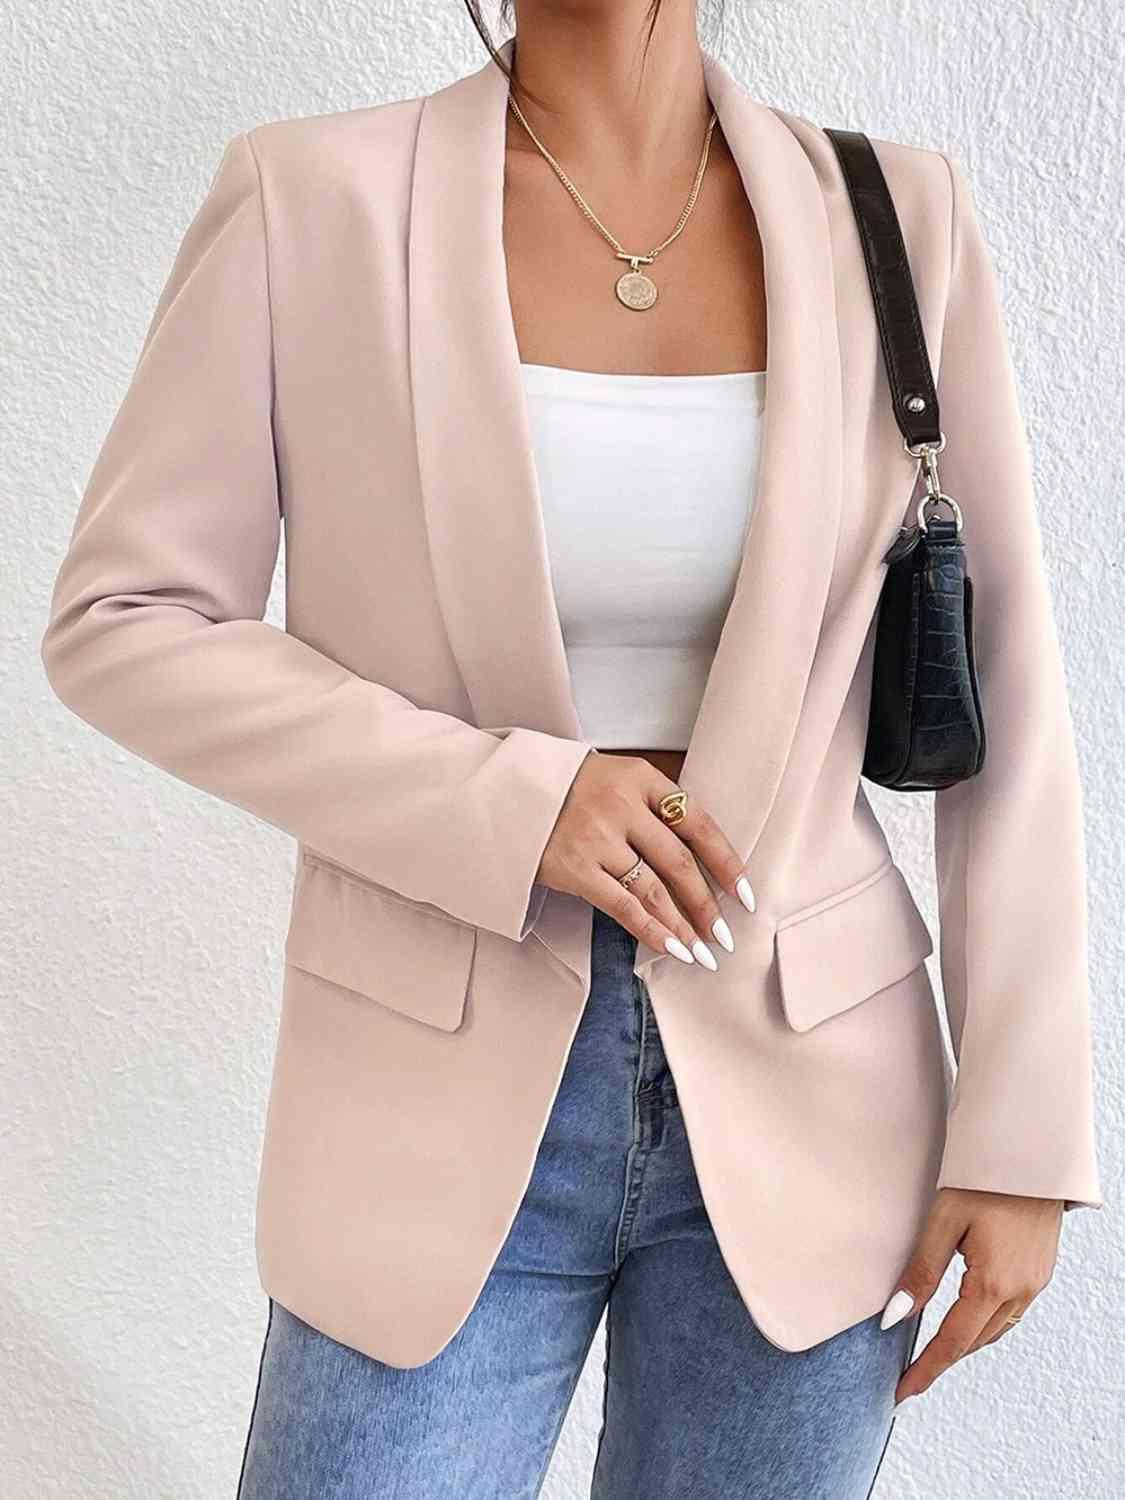 a woman wearing a pink blazer and jeans